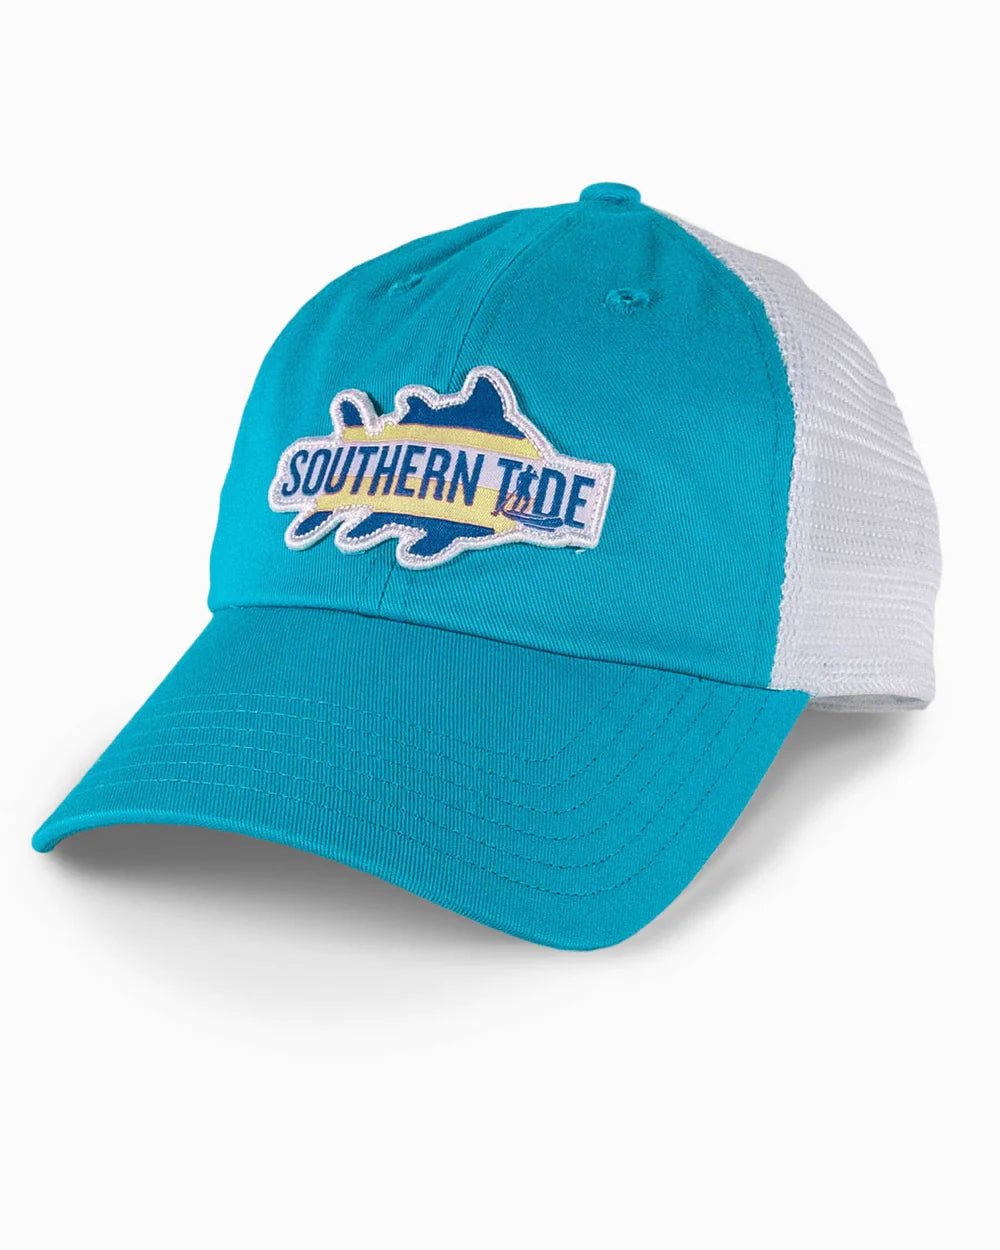 PADDLIN OUT PATCH TRUCKER HAT - TURQOISE